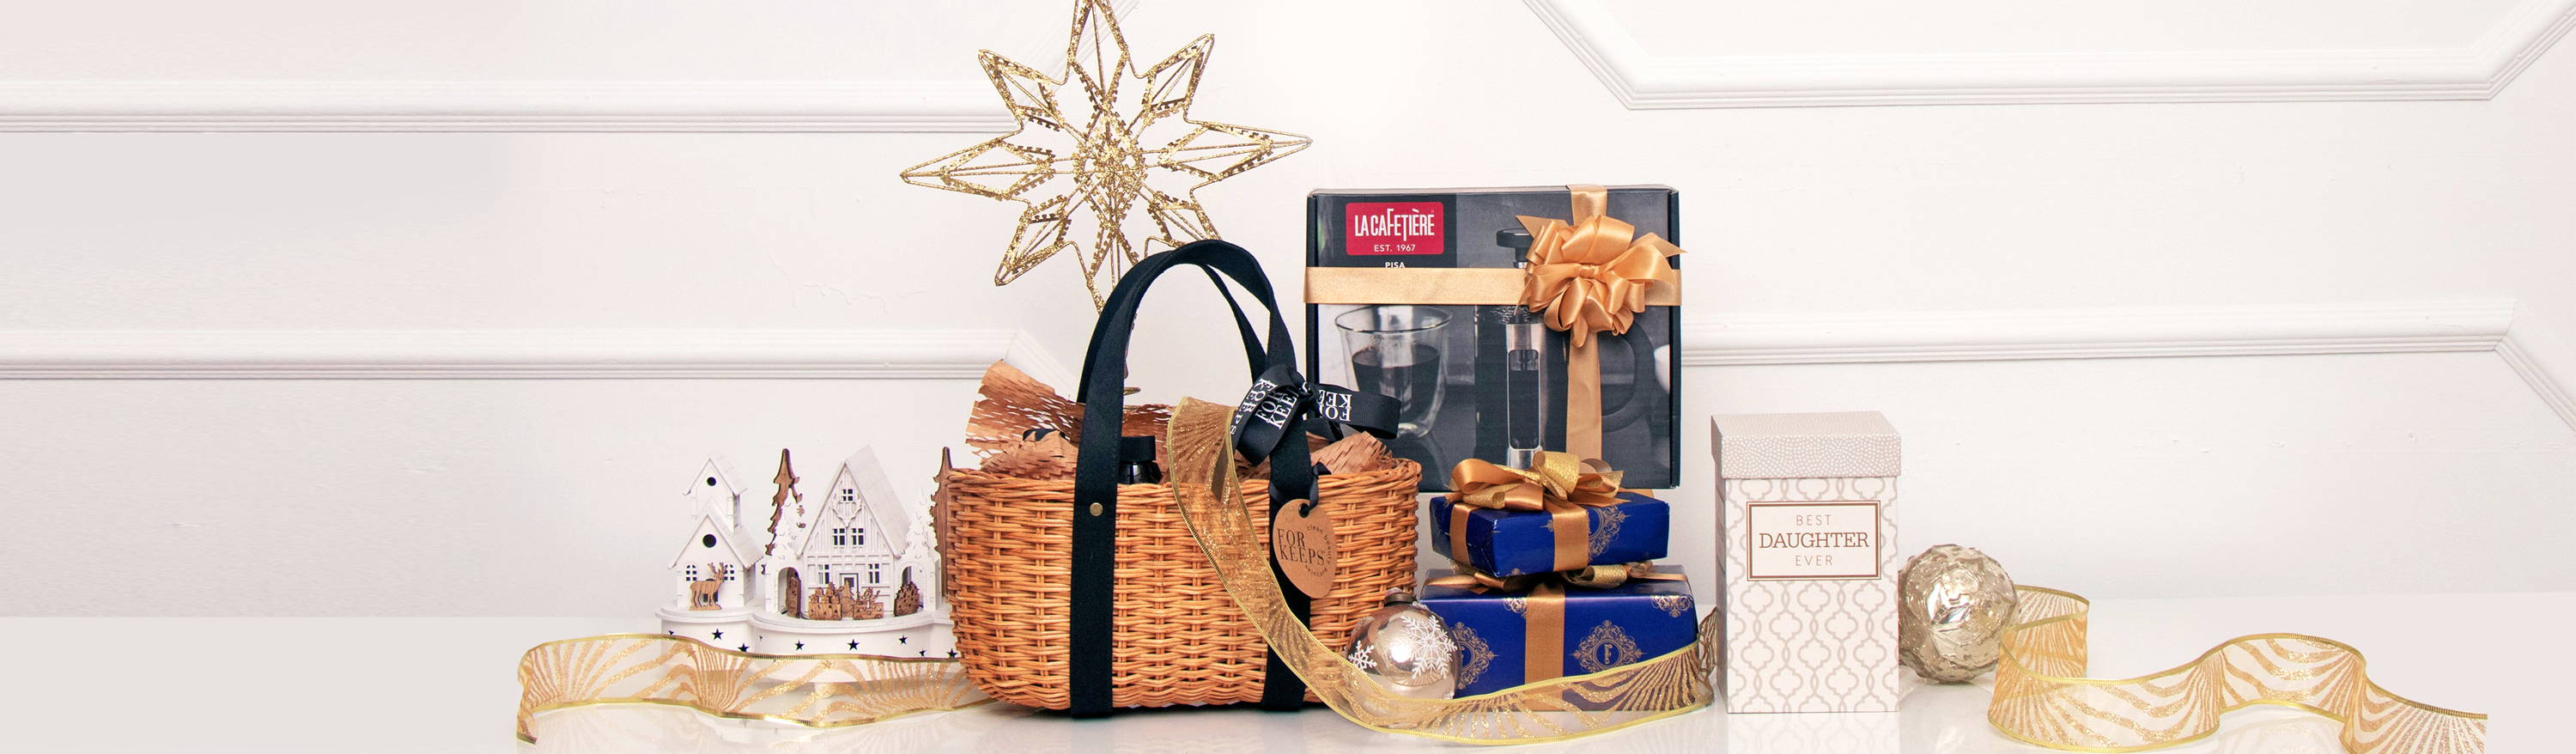 Extraordinary Christmas Gifts: Merry and Bright Home Giftables